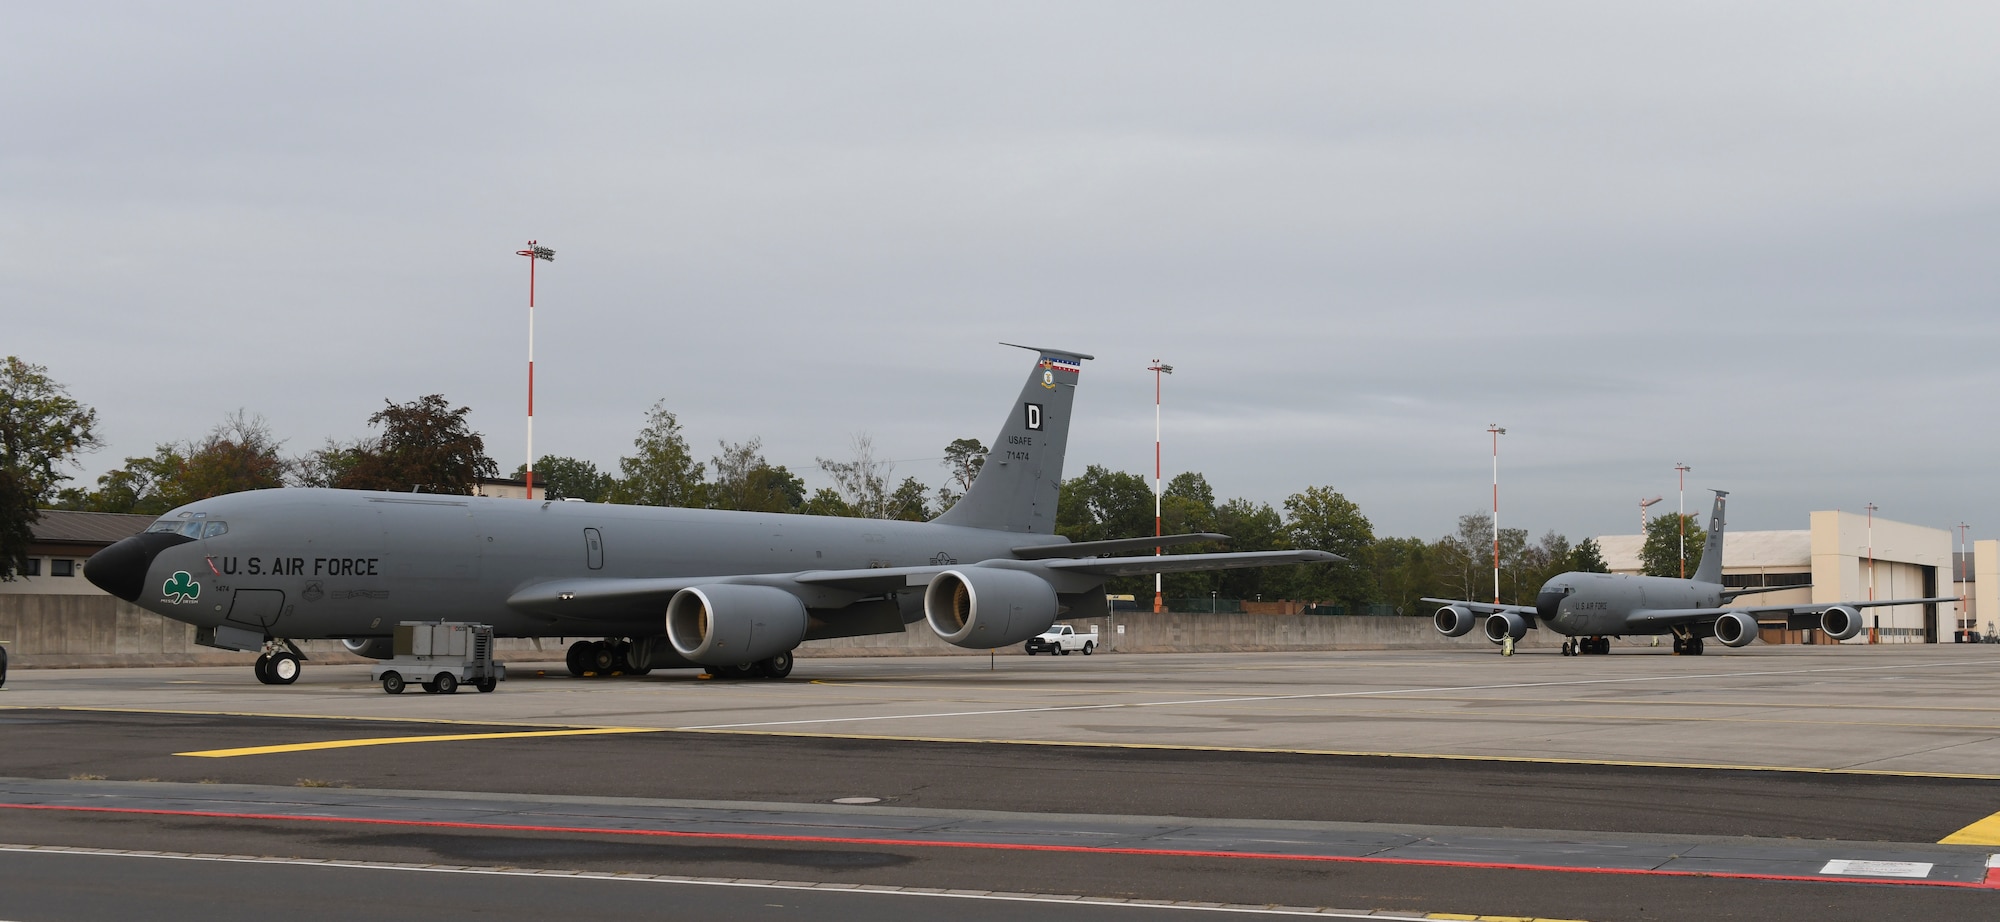 Two KC-135 Stratotanker aircraft assigned to the 100th Air Refueling Wing, sit on the flightline during exercise Wolff Pack at Ramstein Air Base, Germany, Sept. 29, 2020. Aircraft were dis-persed throughout Europe to test the 100th ARW’s ability to generate rapid aerial refueling capabil-ity from a diverse set of air bases. (U.S. Air Force photo by Staff. Sgt. Anthony Hetlage)